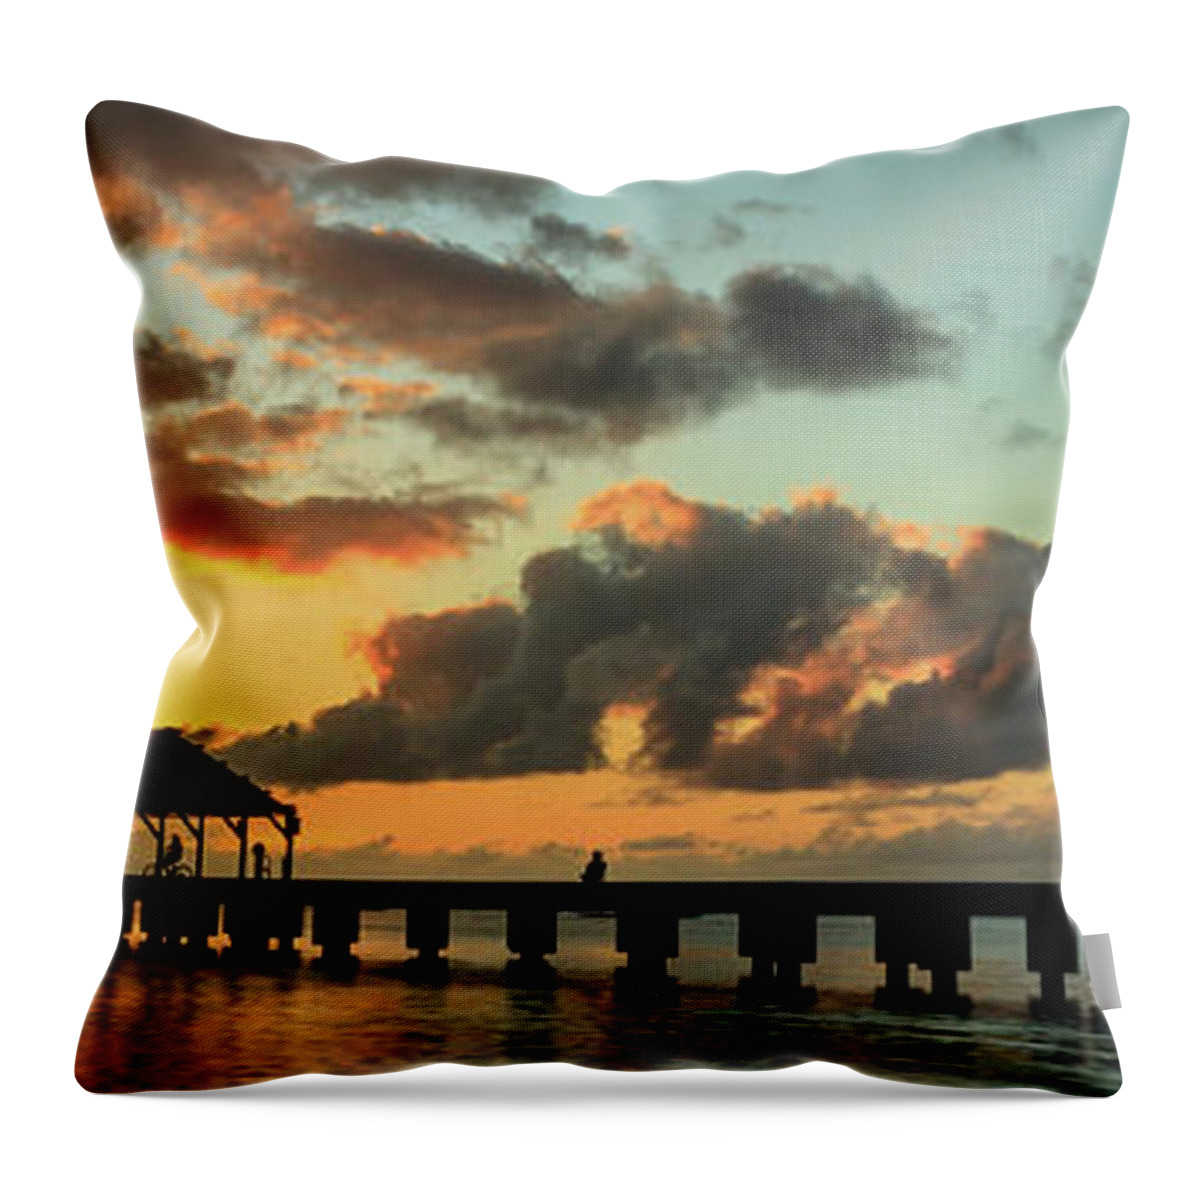 Hanalei Pier Throw Pillow featuring the photograph Hanalei Pier Sunset Panorama by James Eddy